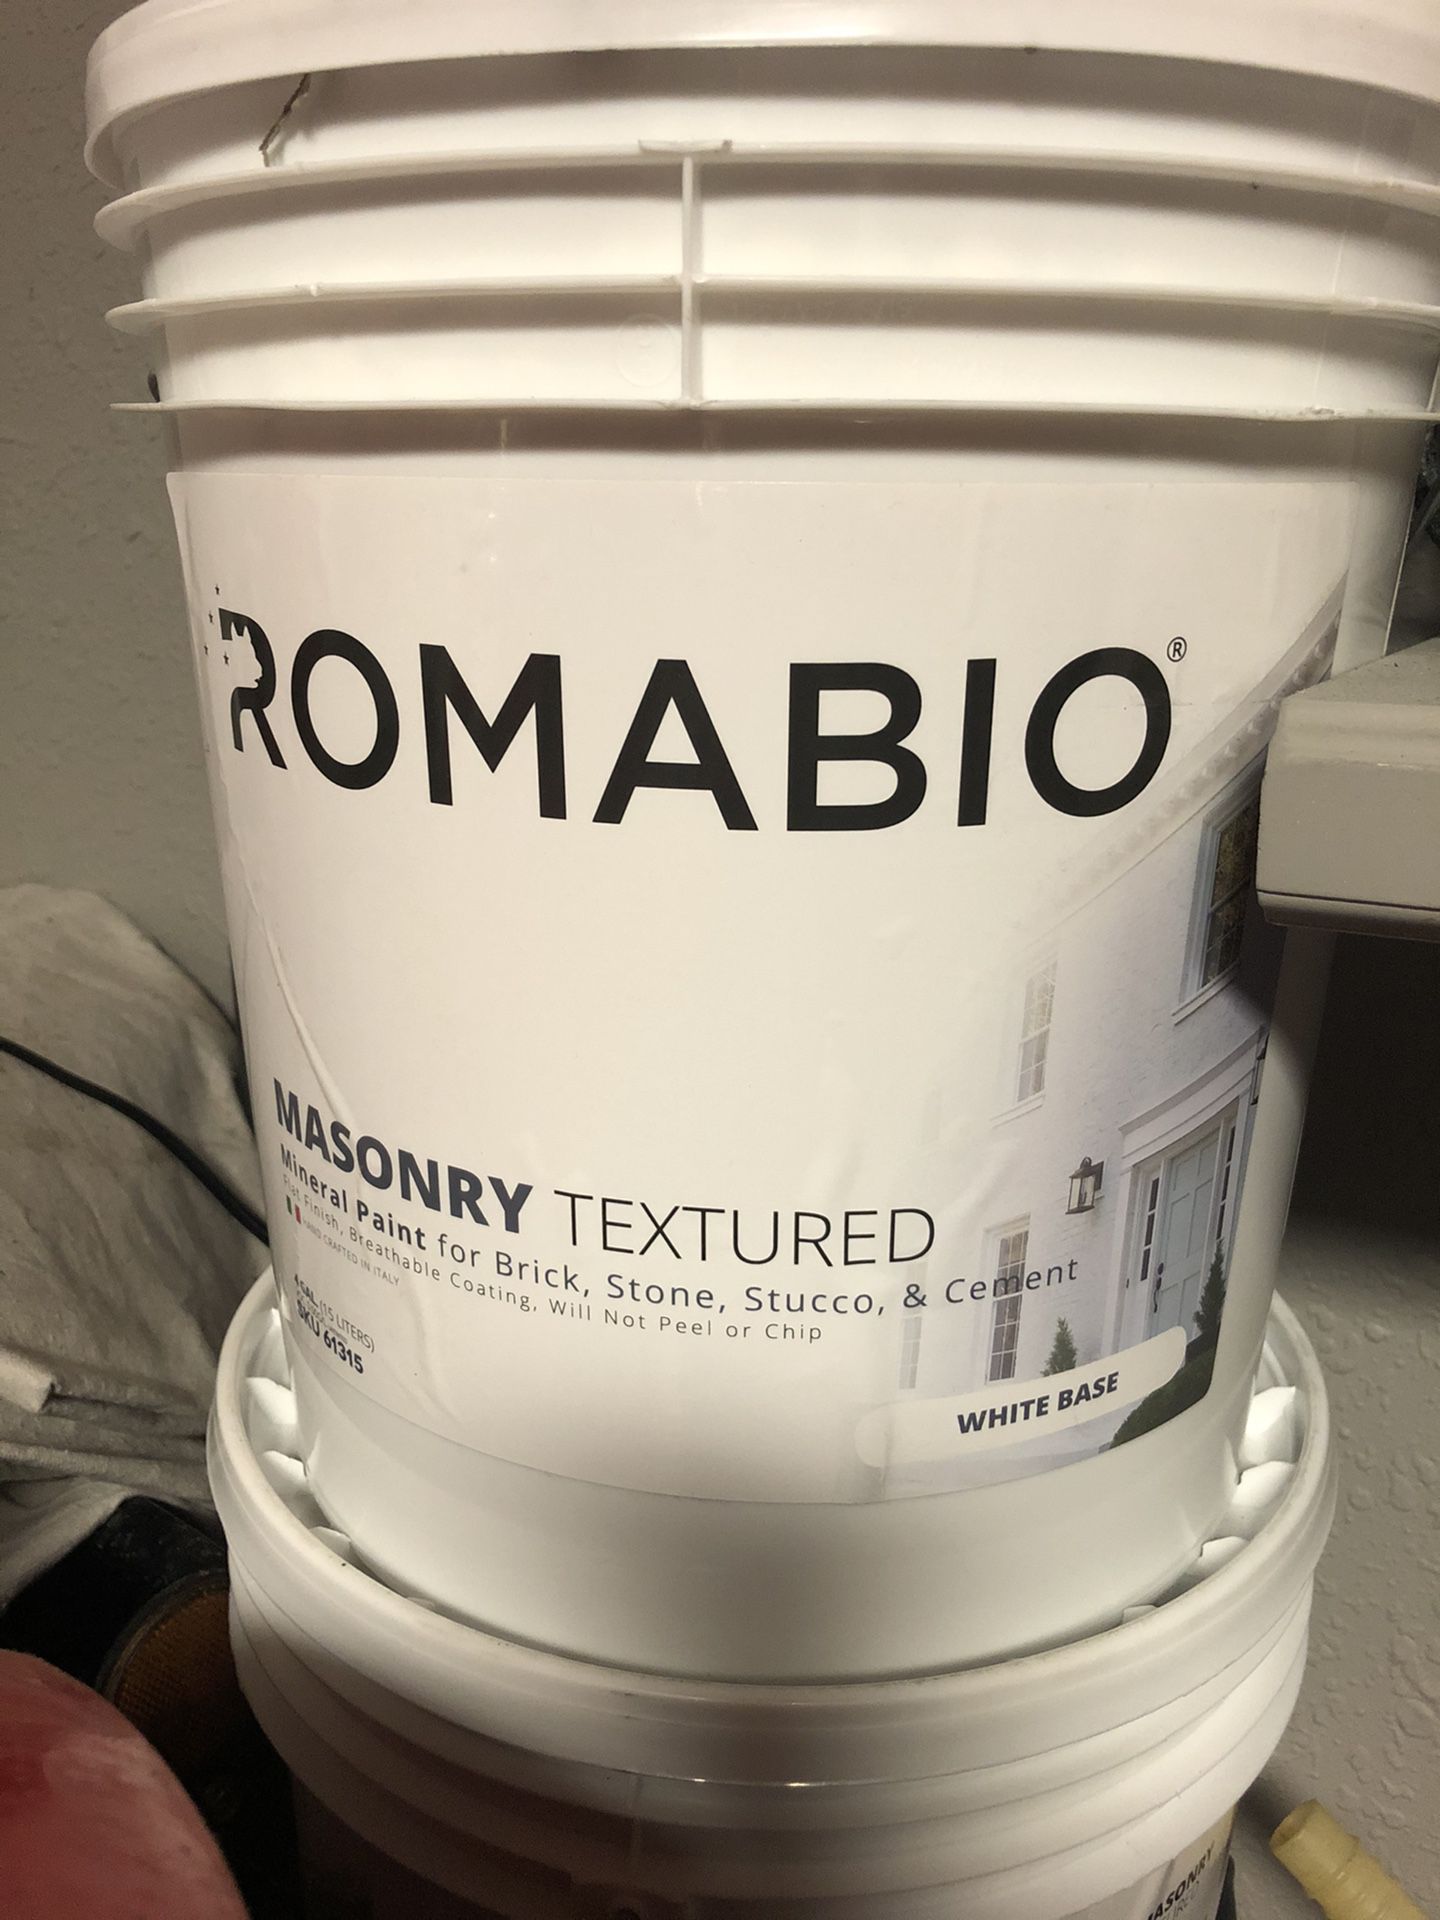 Textured paint for brick, stone, masonry, stucco, cement.